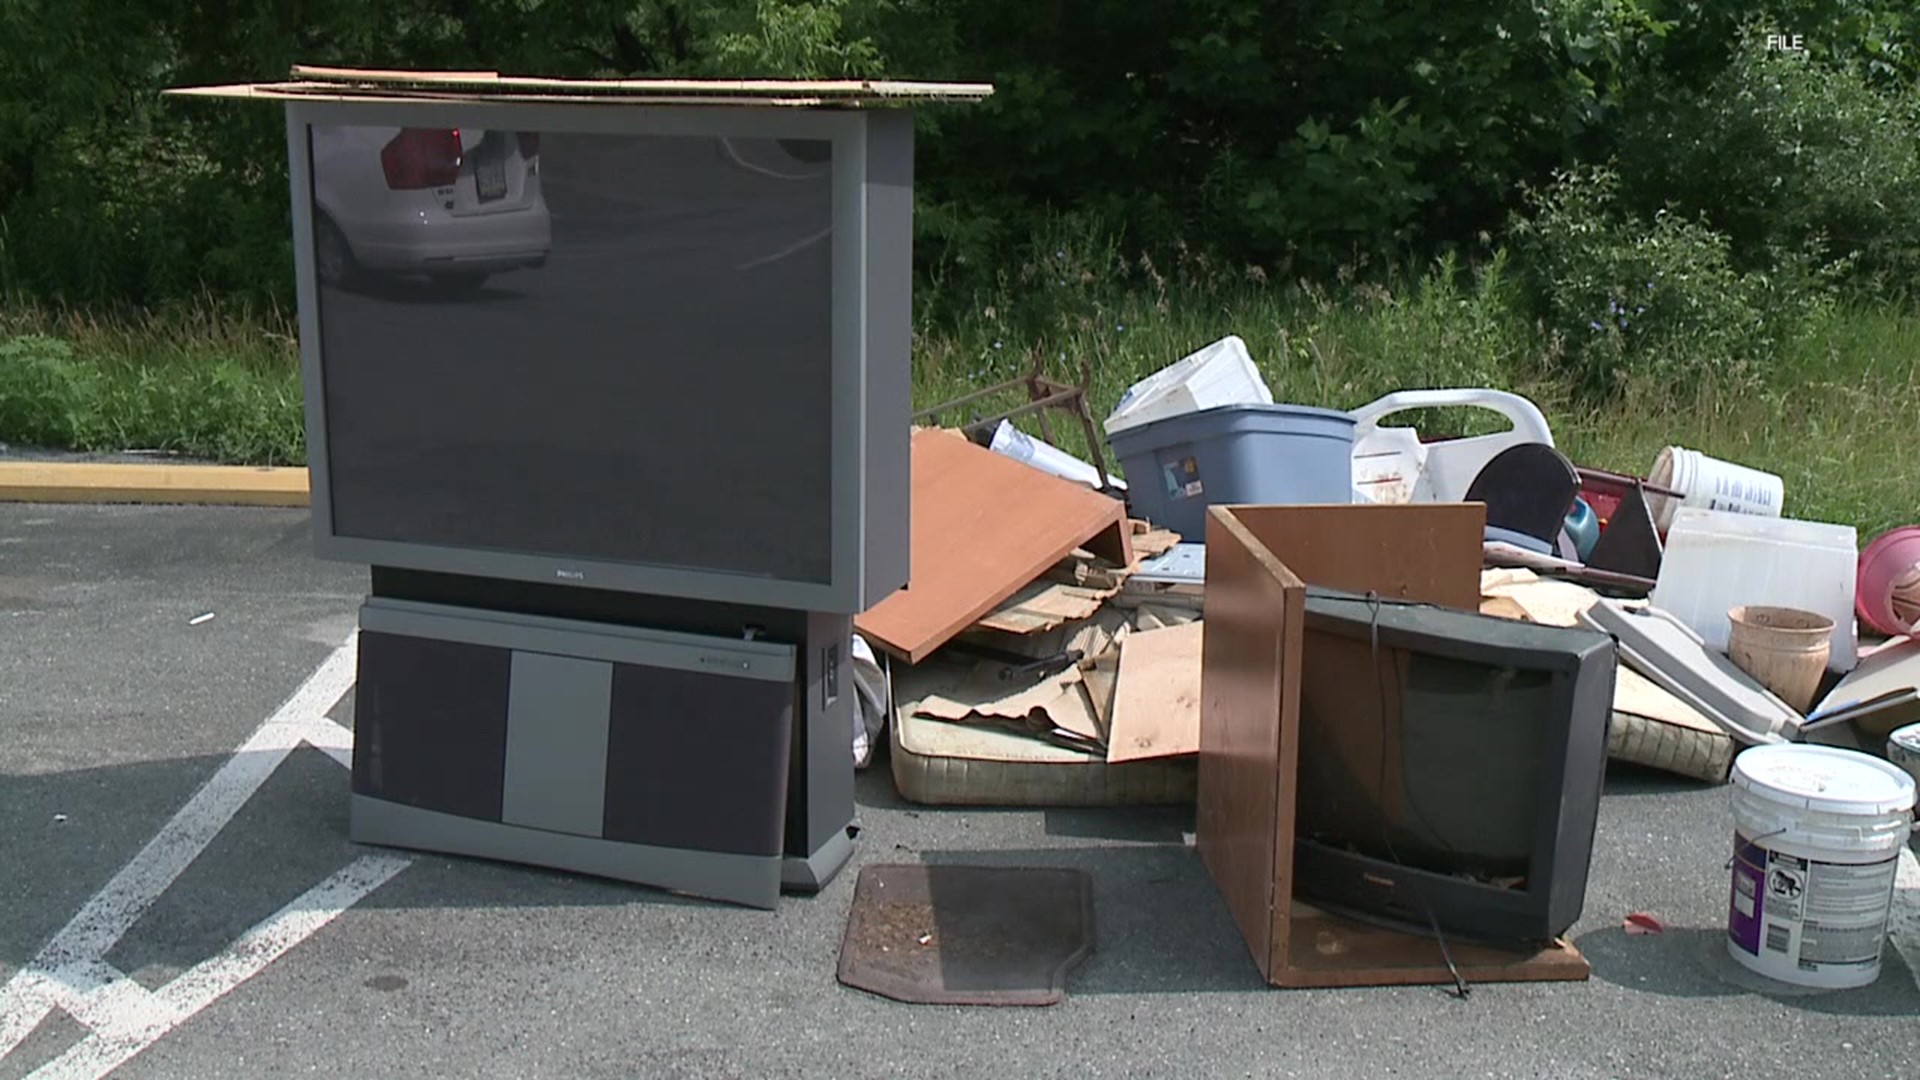 Despite the stay-at-home order, Monroe County Municipal Waste Authority says it is having problems when it comes to illegal dumping in this part of the Poconos.